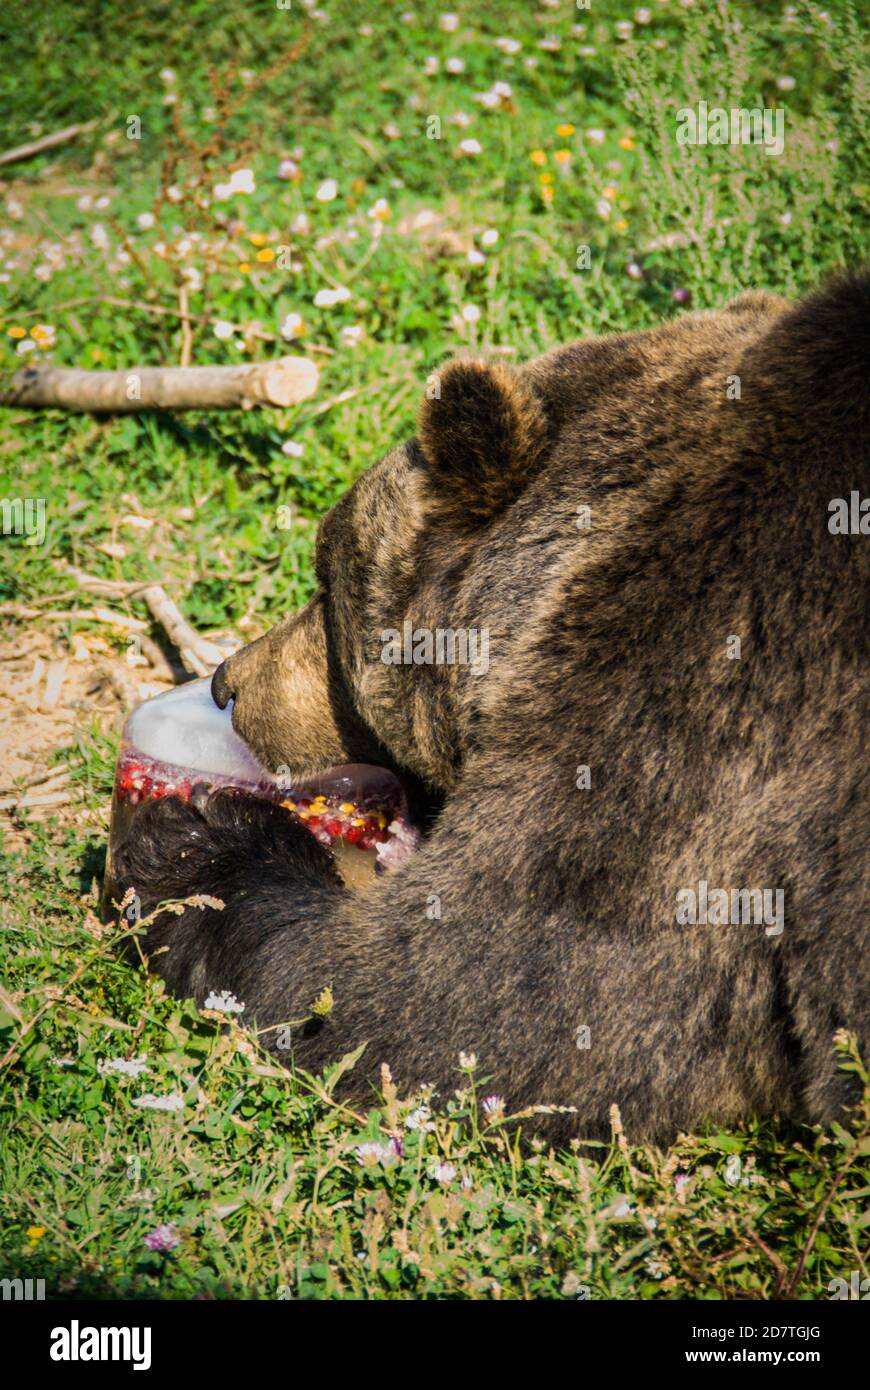 Huge brown bear eating fruit in a huge ice block. Kuterevo bears sanctuary in Croatia, protection of the wild animals Stock Photo